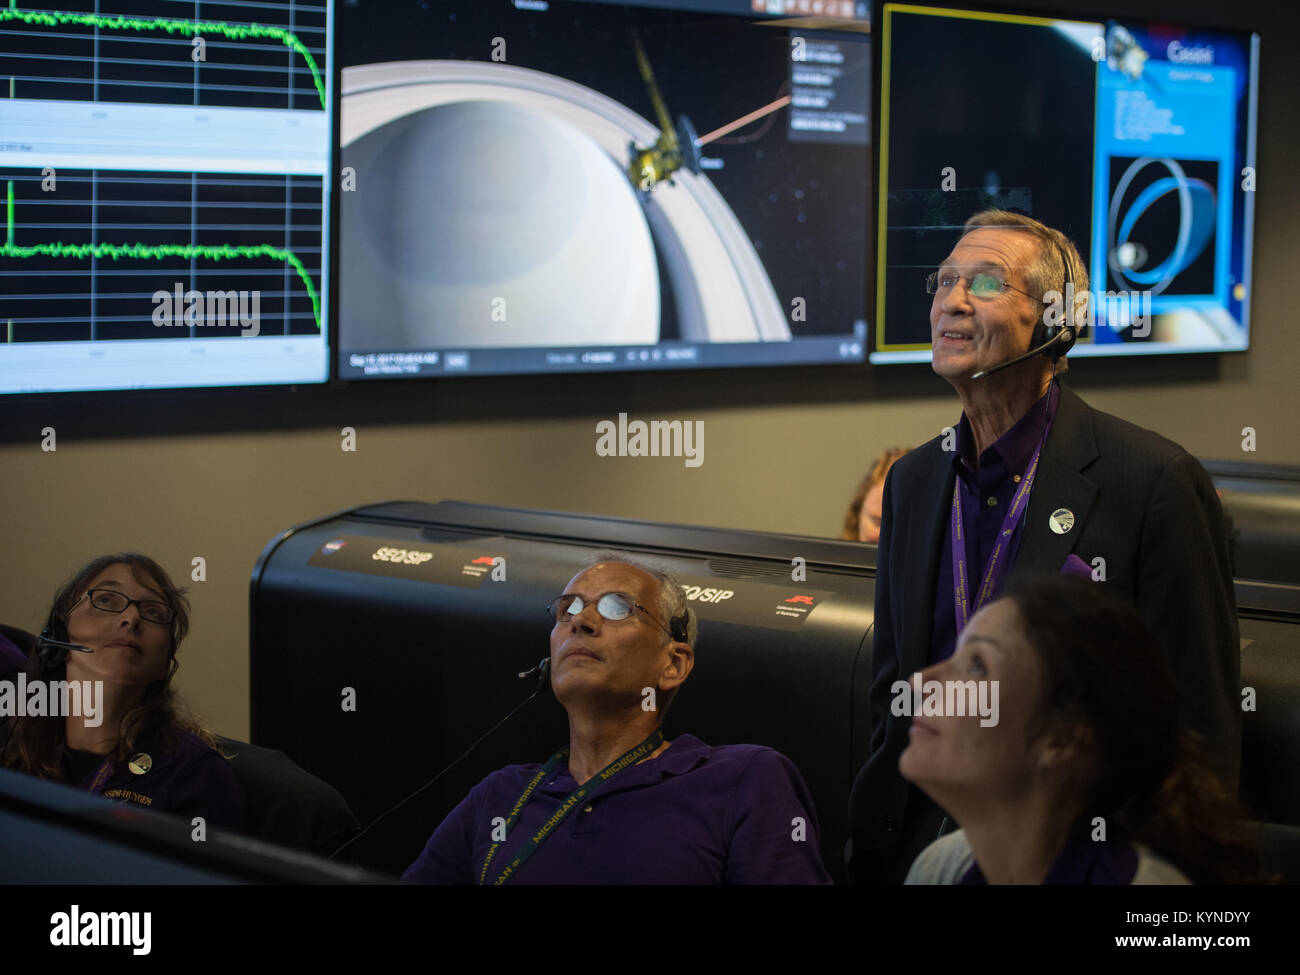 Cassini program manager at JPL, Earl Maize, standing, watches telemetry come in from Cassini with Julie Bellerose, left, Duane Roth, second from left, and Mar Vaquero of the Cassini navigation team in the mission control room, Friday, Sept. 15, 2017 at NASA's Jet Propulsion Laboratory in Pasadena, California. Since its arrival in 2004, the Cassini-Huygens mission has been a discovery machine, revolutionizing our knowledge of the Saturn system and captivating us with data and images never before obtained with such detail and clarity. On Sept. 15, 2017, operators deliberately plunged the spacecr Stock Photo